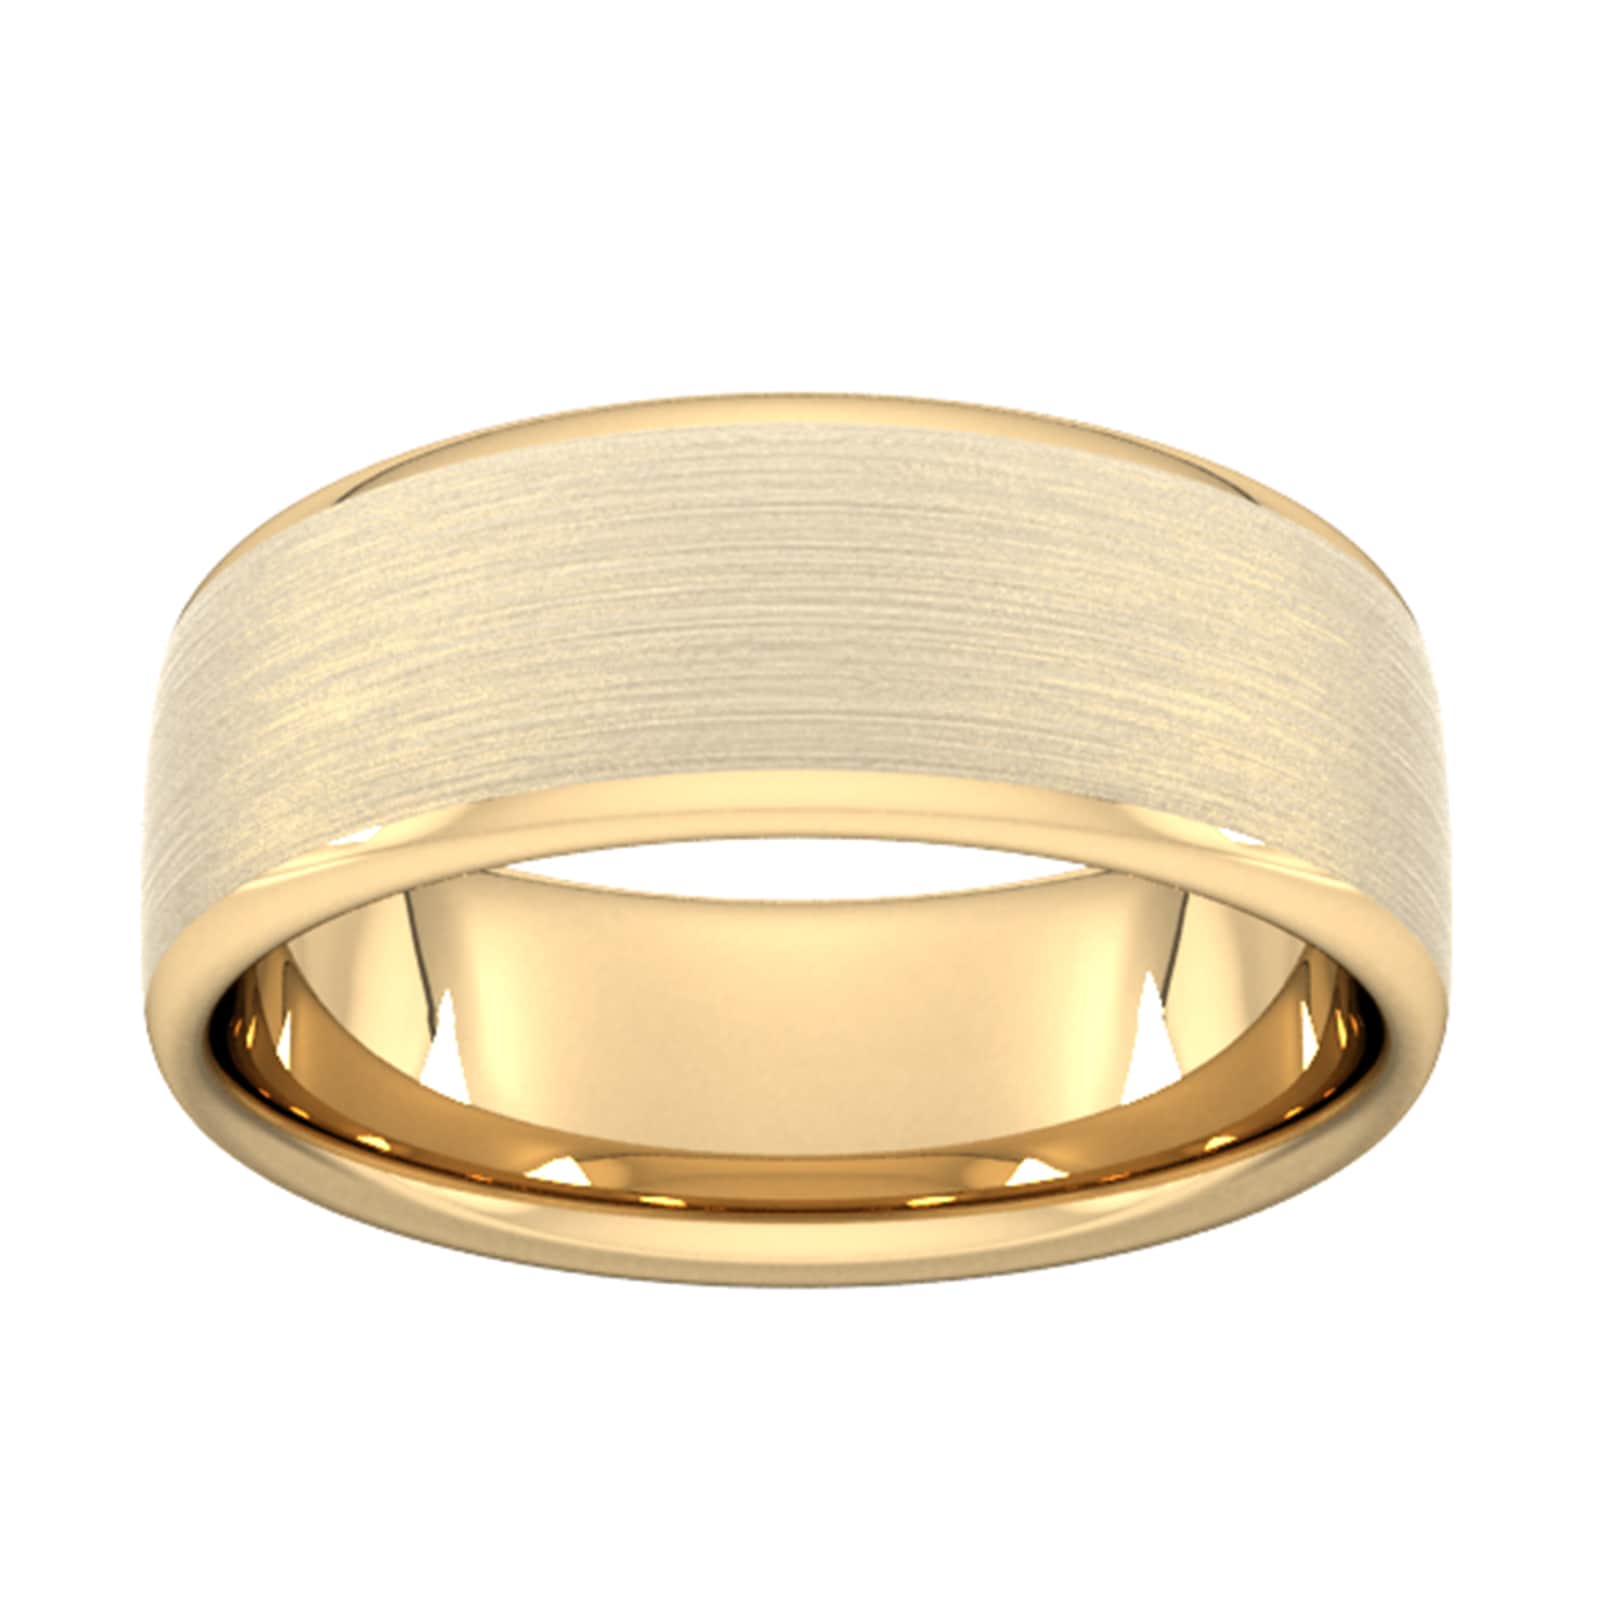 8mm D Shape Standard Matt Finished Wedding Ring In 9 Carat Yellow Gold - Ring Size H